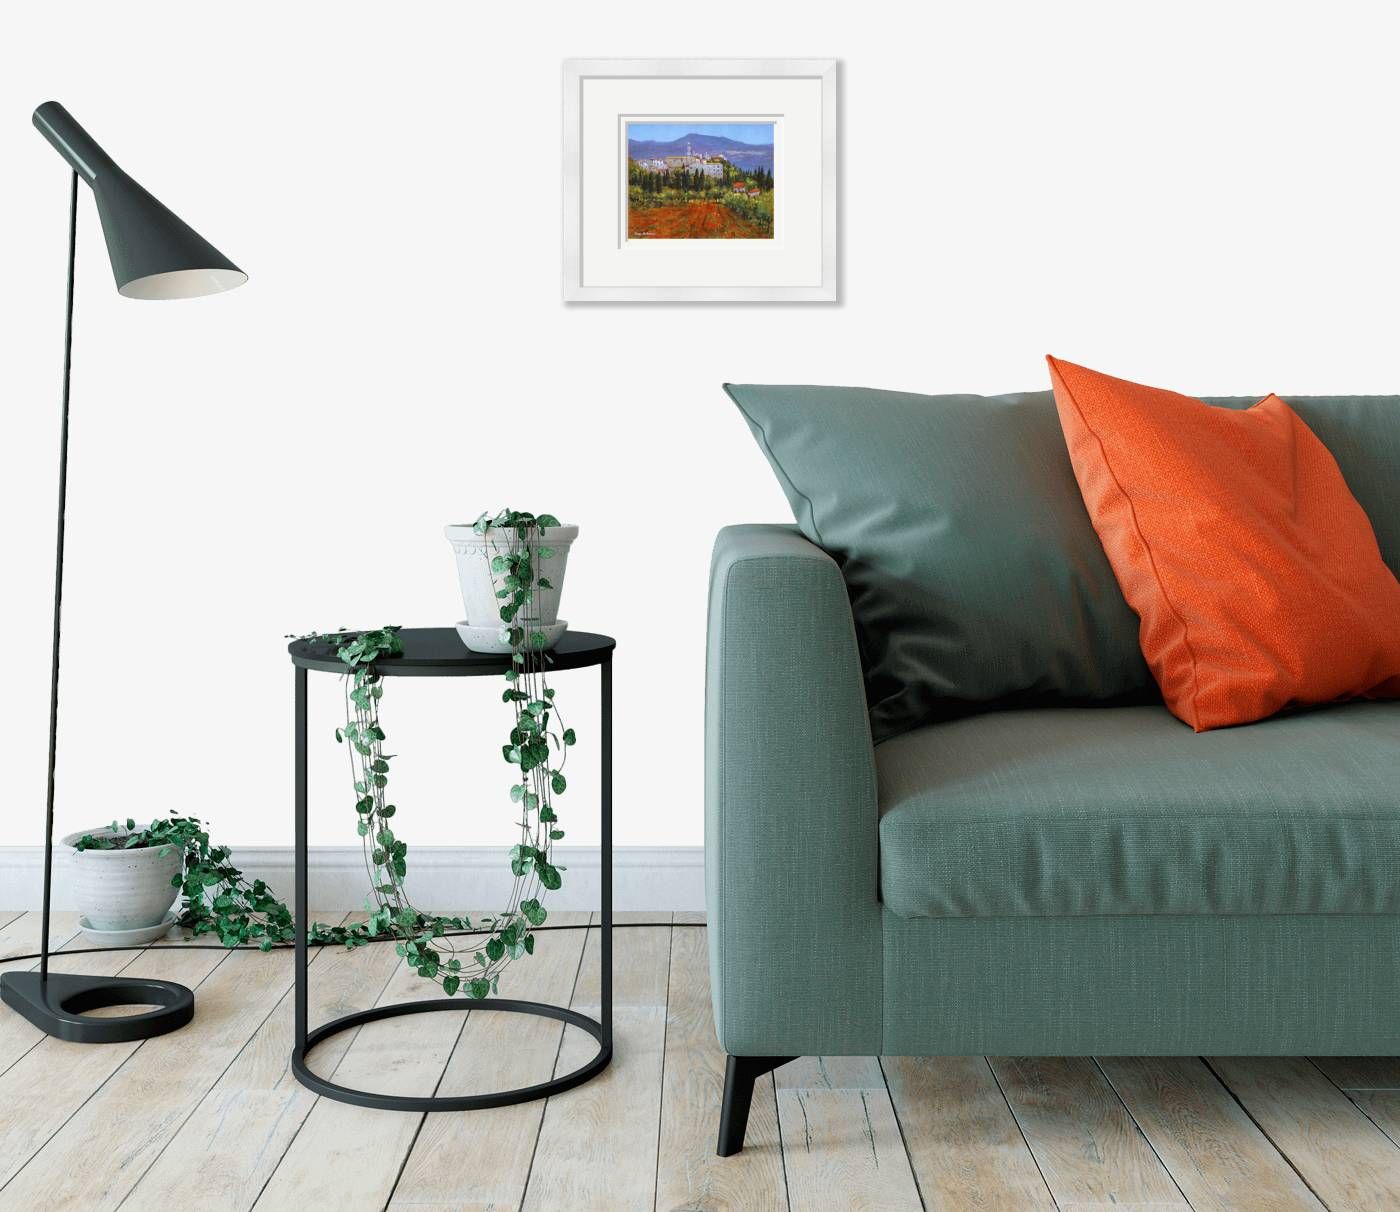 Small framed - Tuscan Poppies - 322 by Chris McMorrow